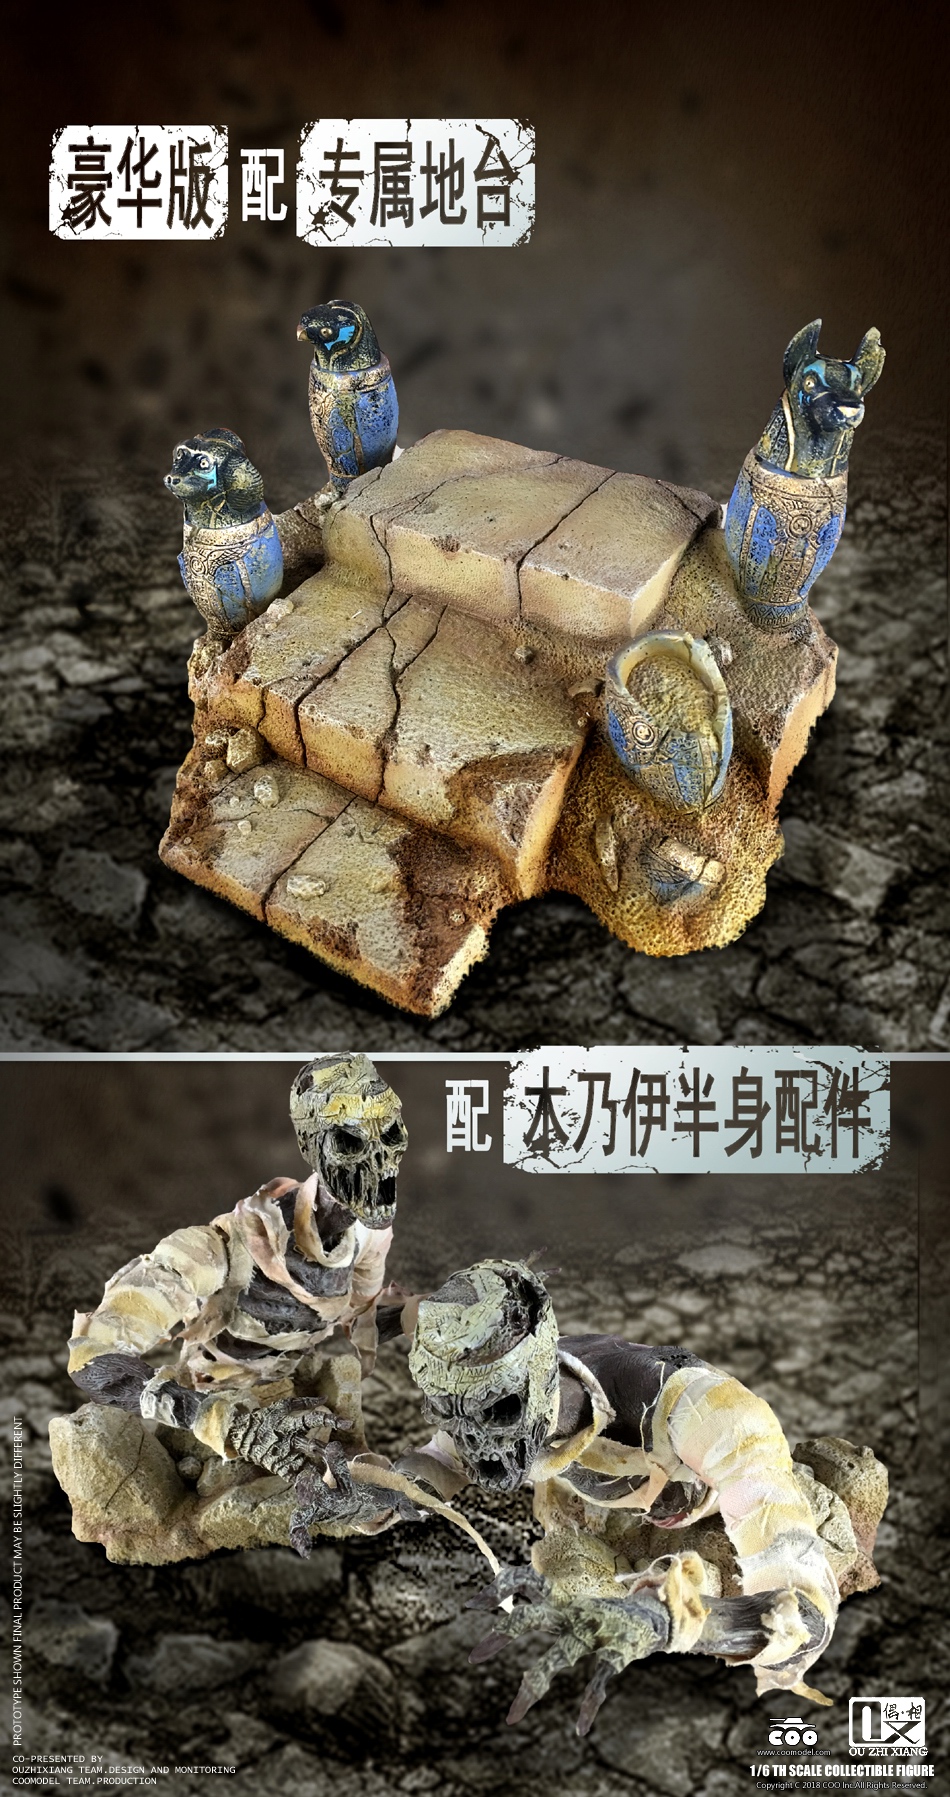 Ouzhixiang - NEW PRODUCT: COOMODEL X OUZHIXIANG 1/6 MONSTER FILE SERIES - MUMMY -Standard Ver & Deluxe Ver 16491111